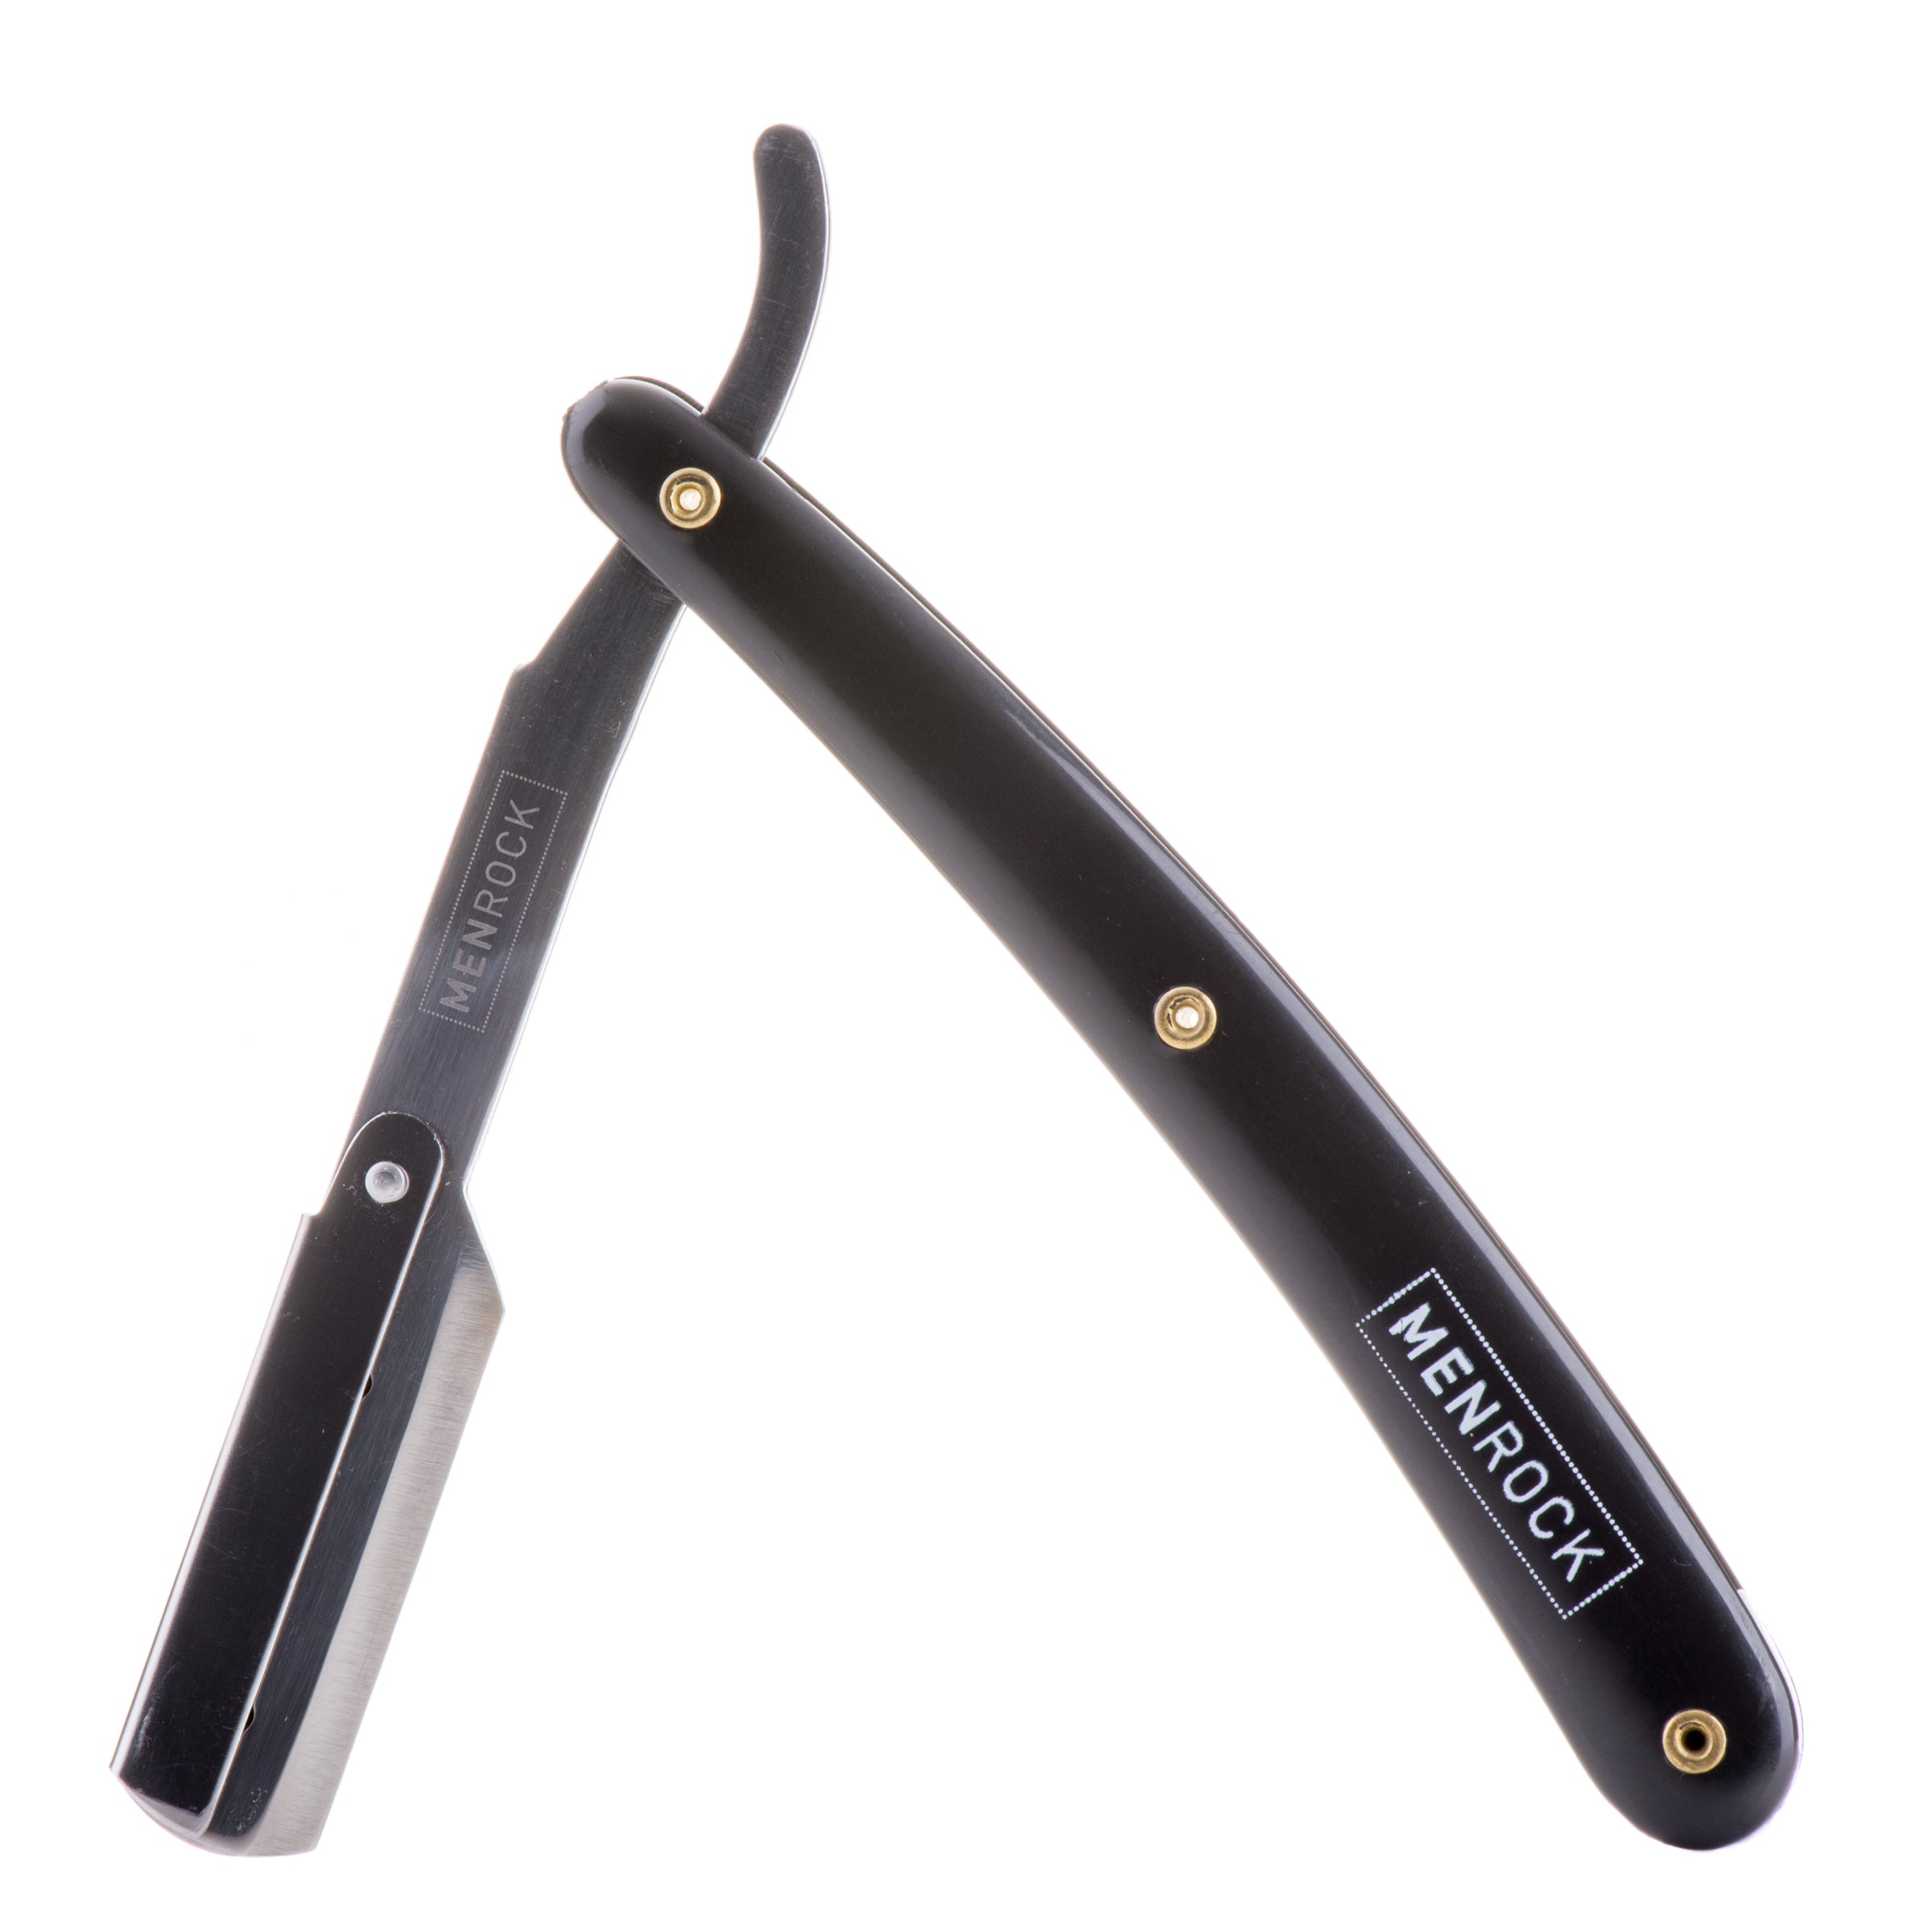 Cut throat razor - Shavette - is perfect traditional shaving tool for wet shave experience